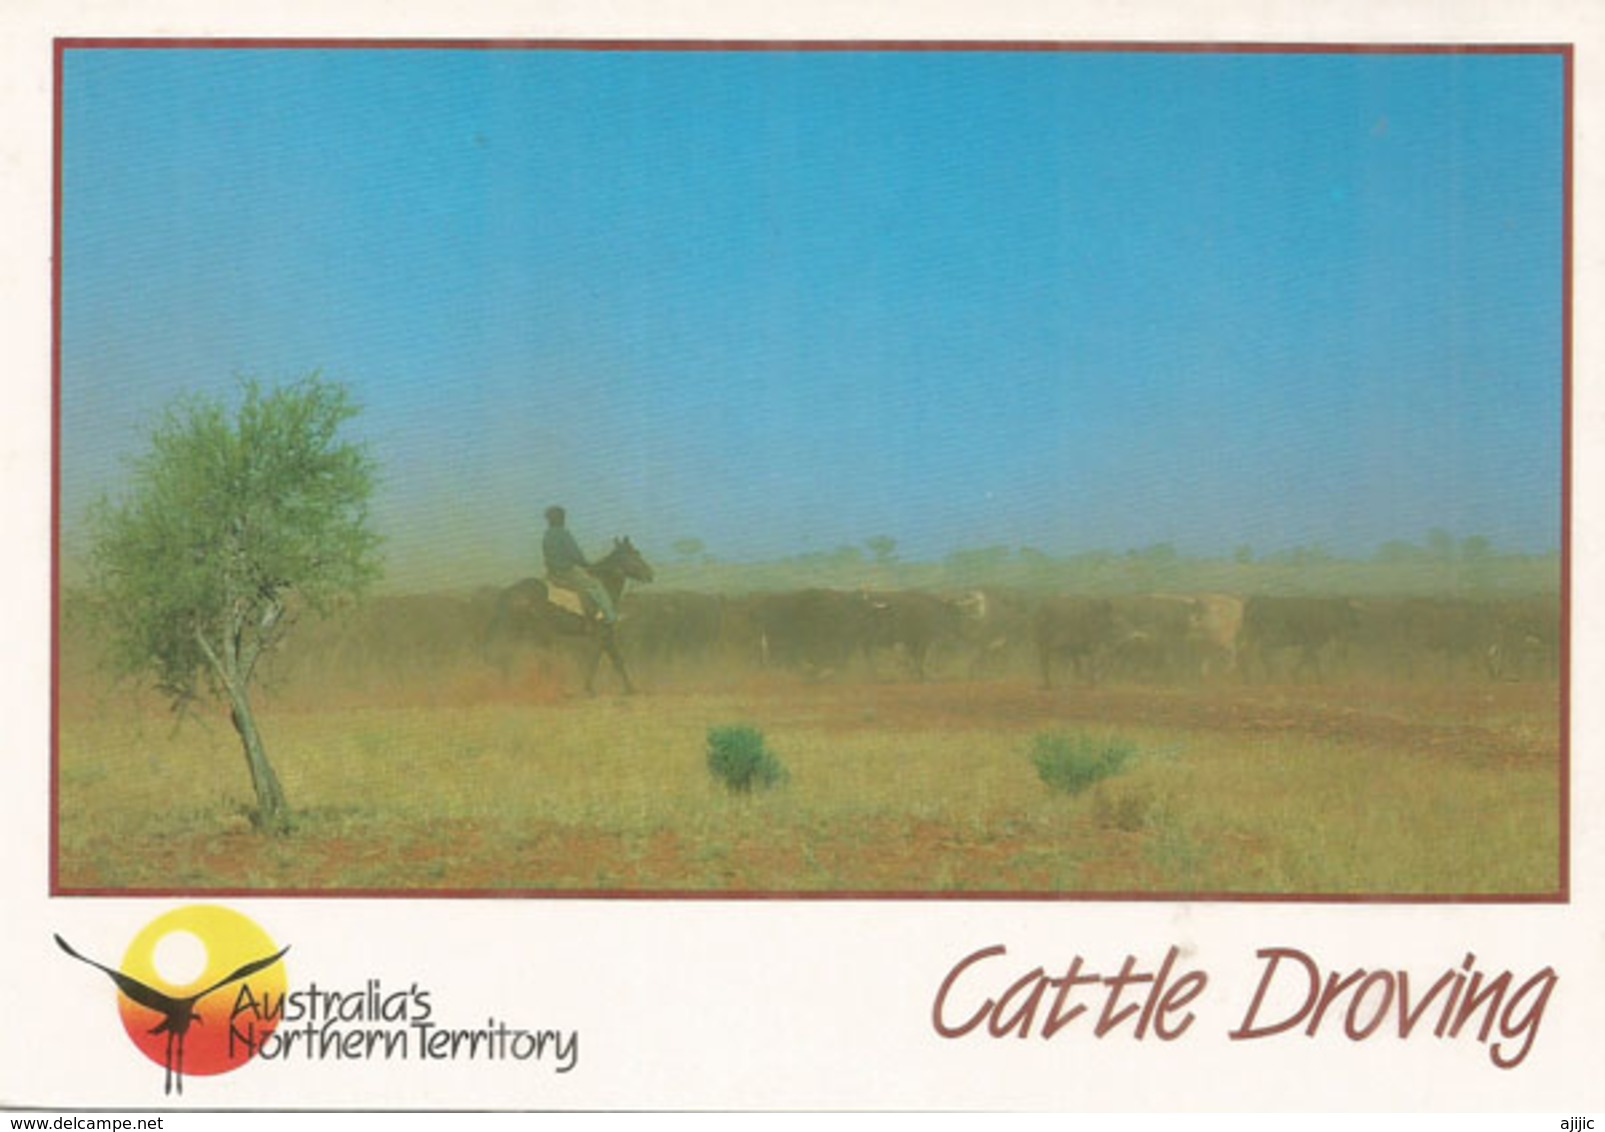 Mustering Cattle, Mt Ebenezer Station, Postcard Sent To Andorra, With Arrival Postmark - Alice Springs